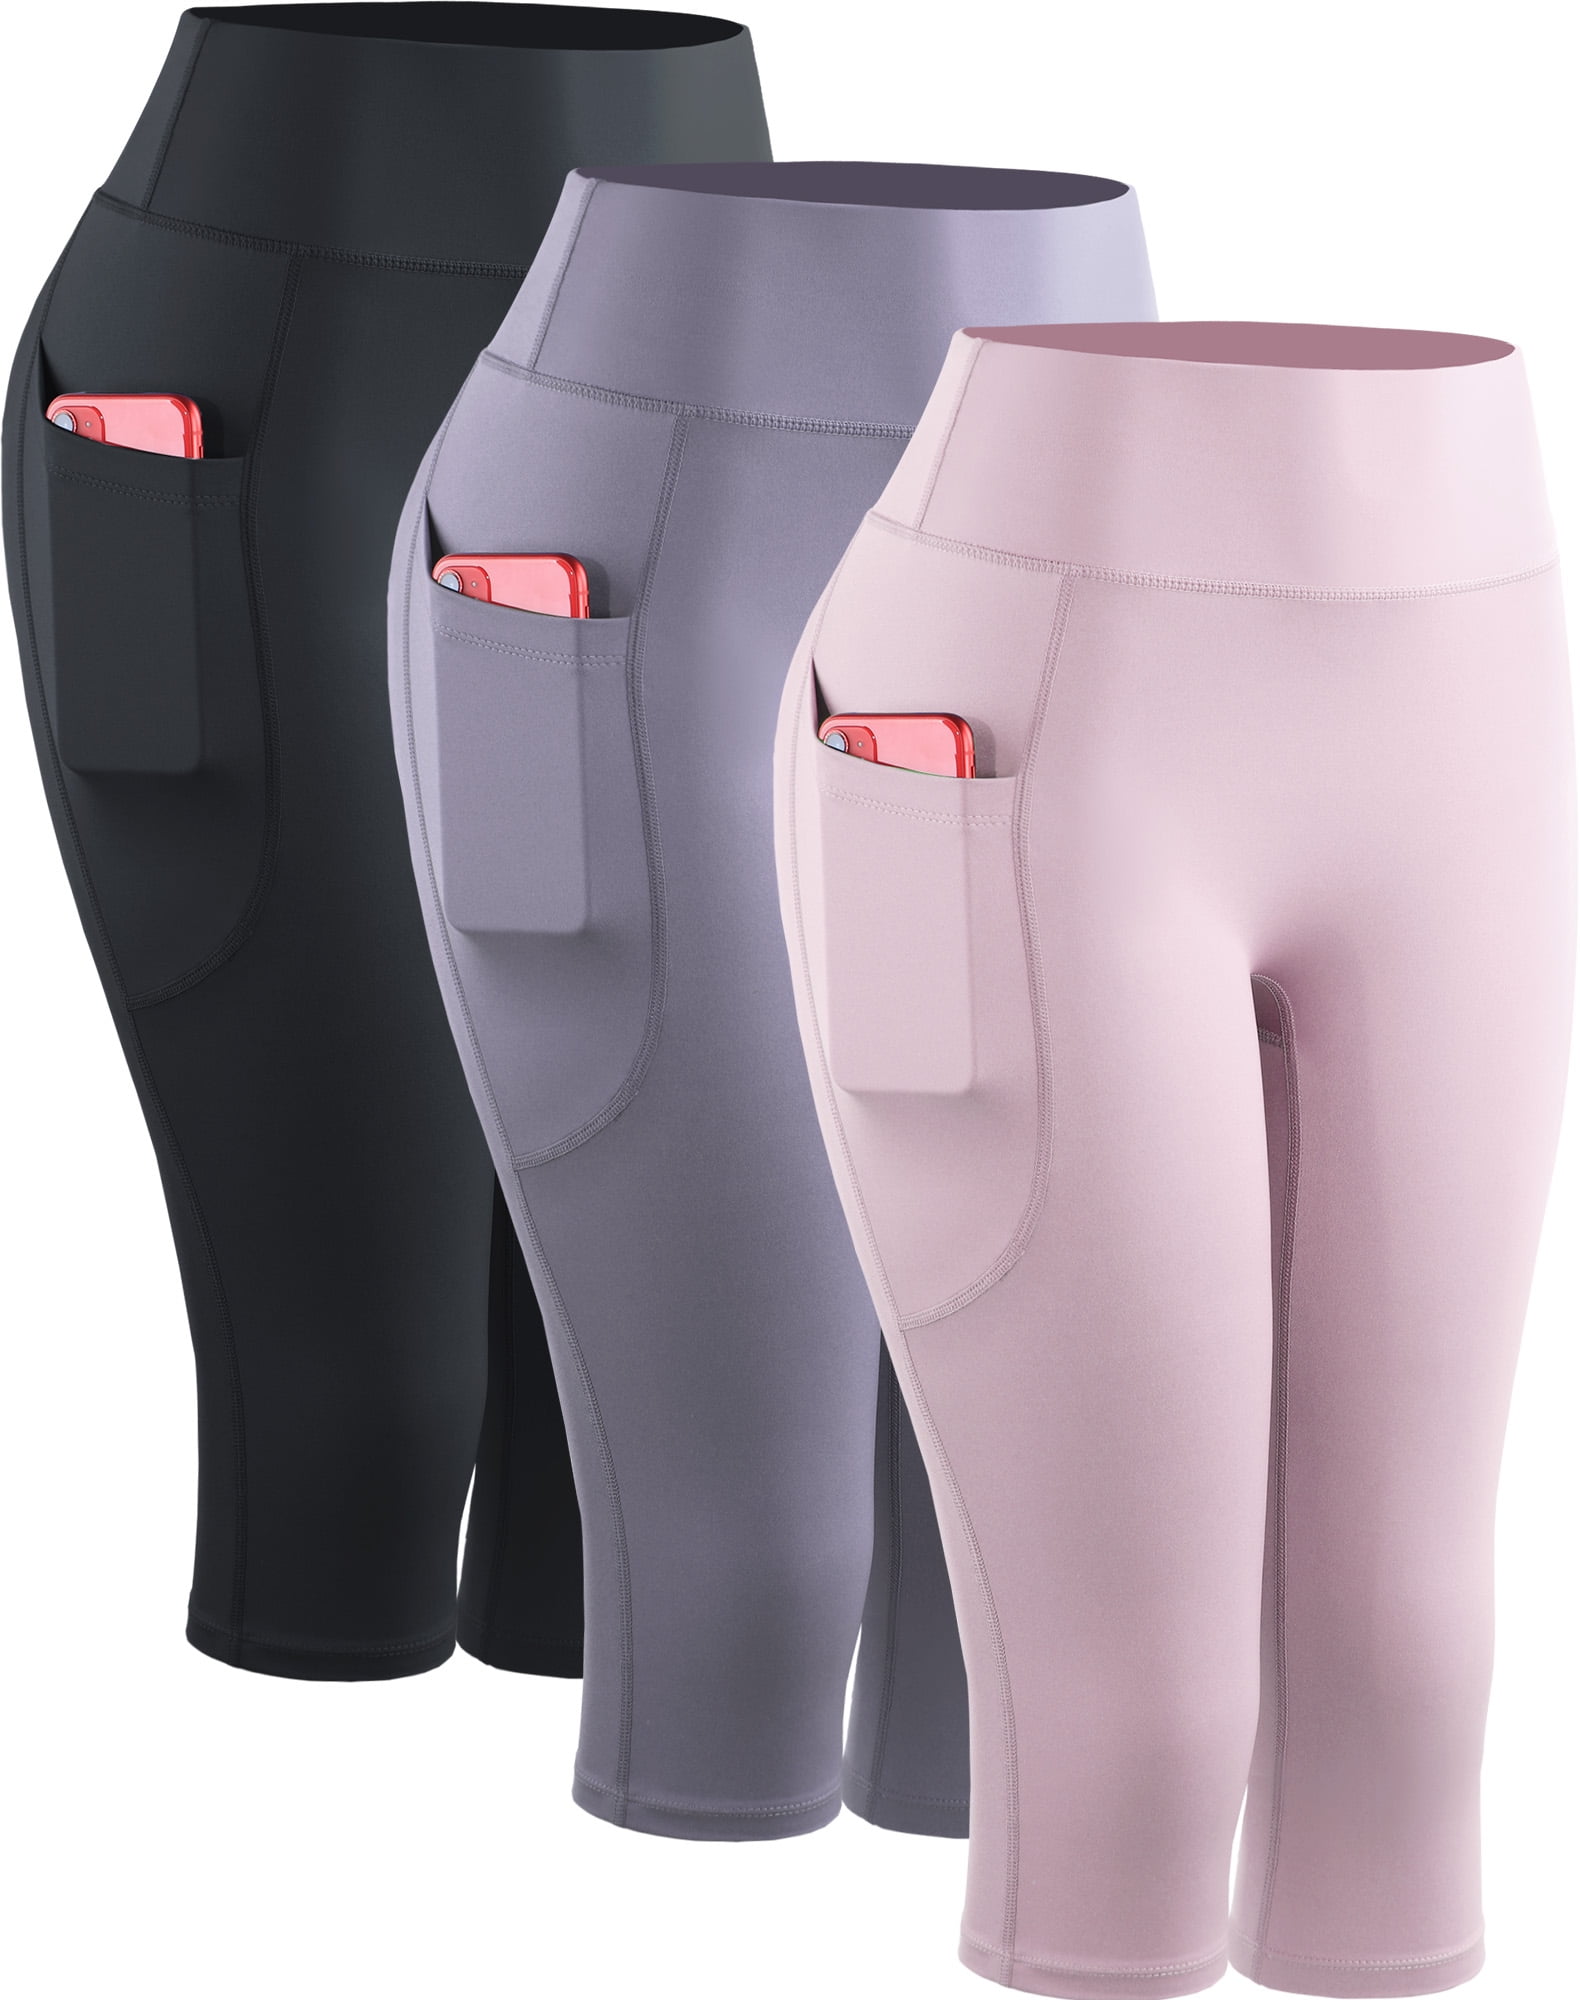 High Waisted Sheer Yoga Pants For Women Butt Lifting, Anti Cellulite, Tummy  Control, Workout, And Sport Gym Tights Women From Desheng1188, $18.82